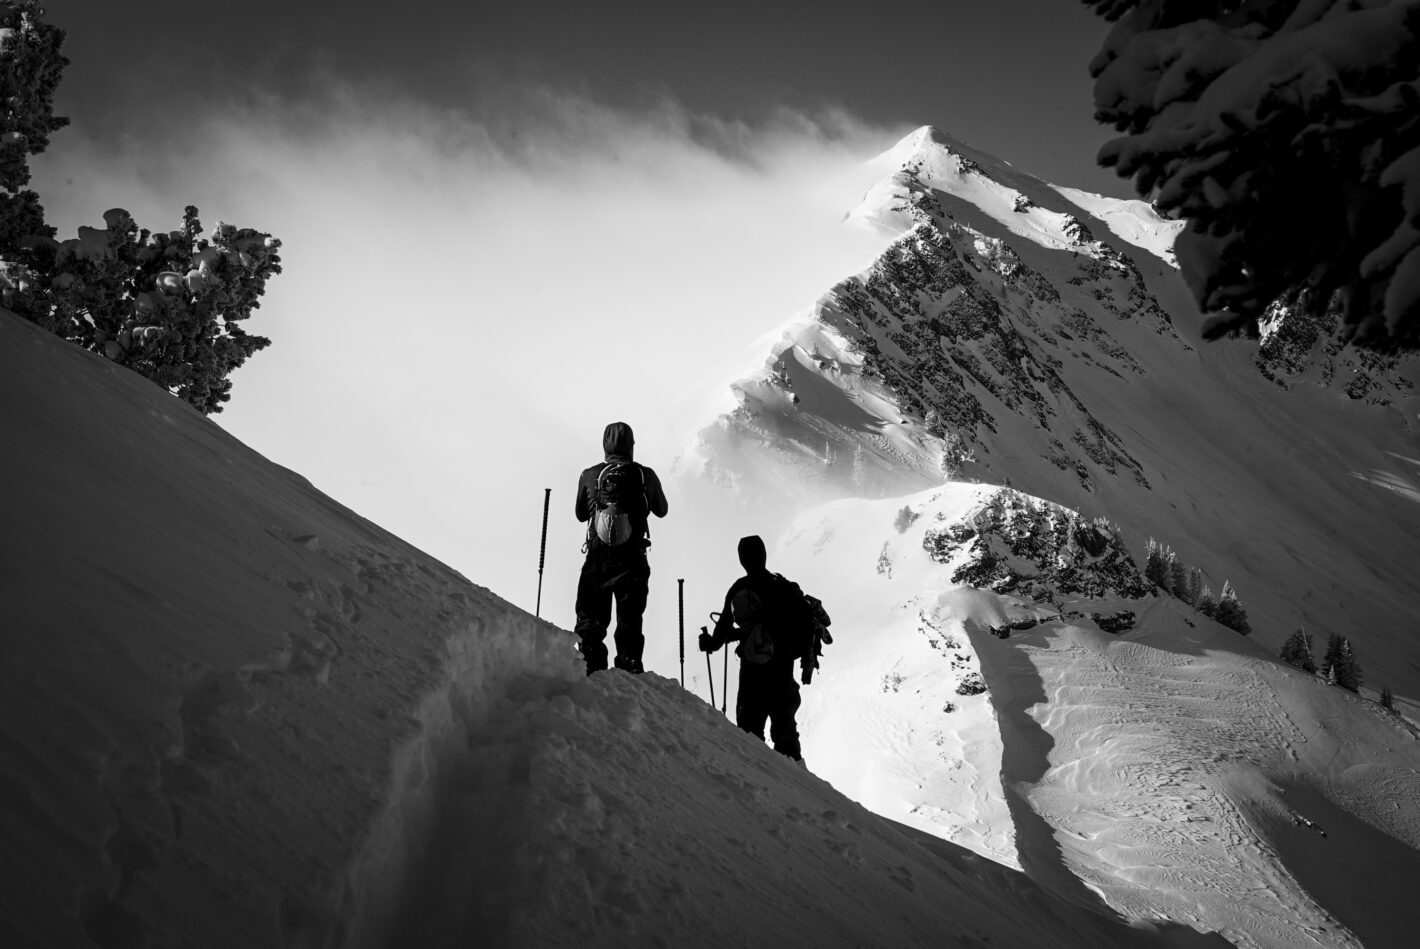 Backcountry skiers in black and white facing snow capped peaks